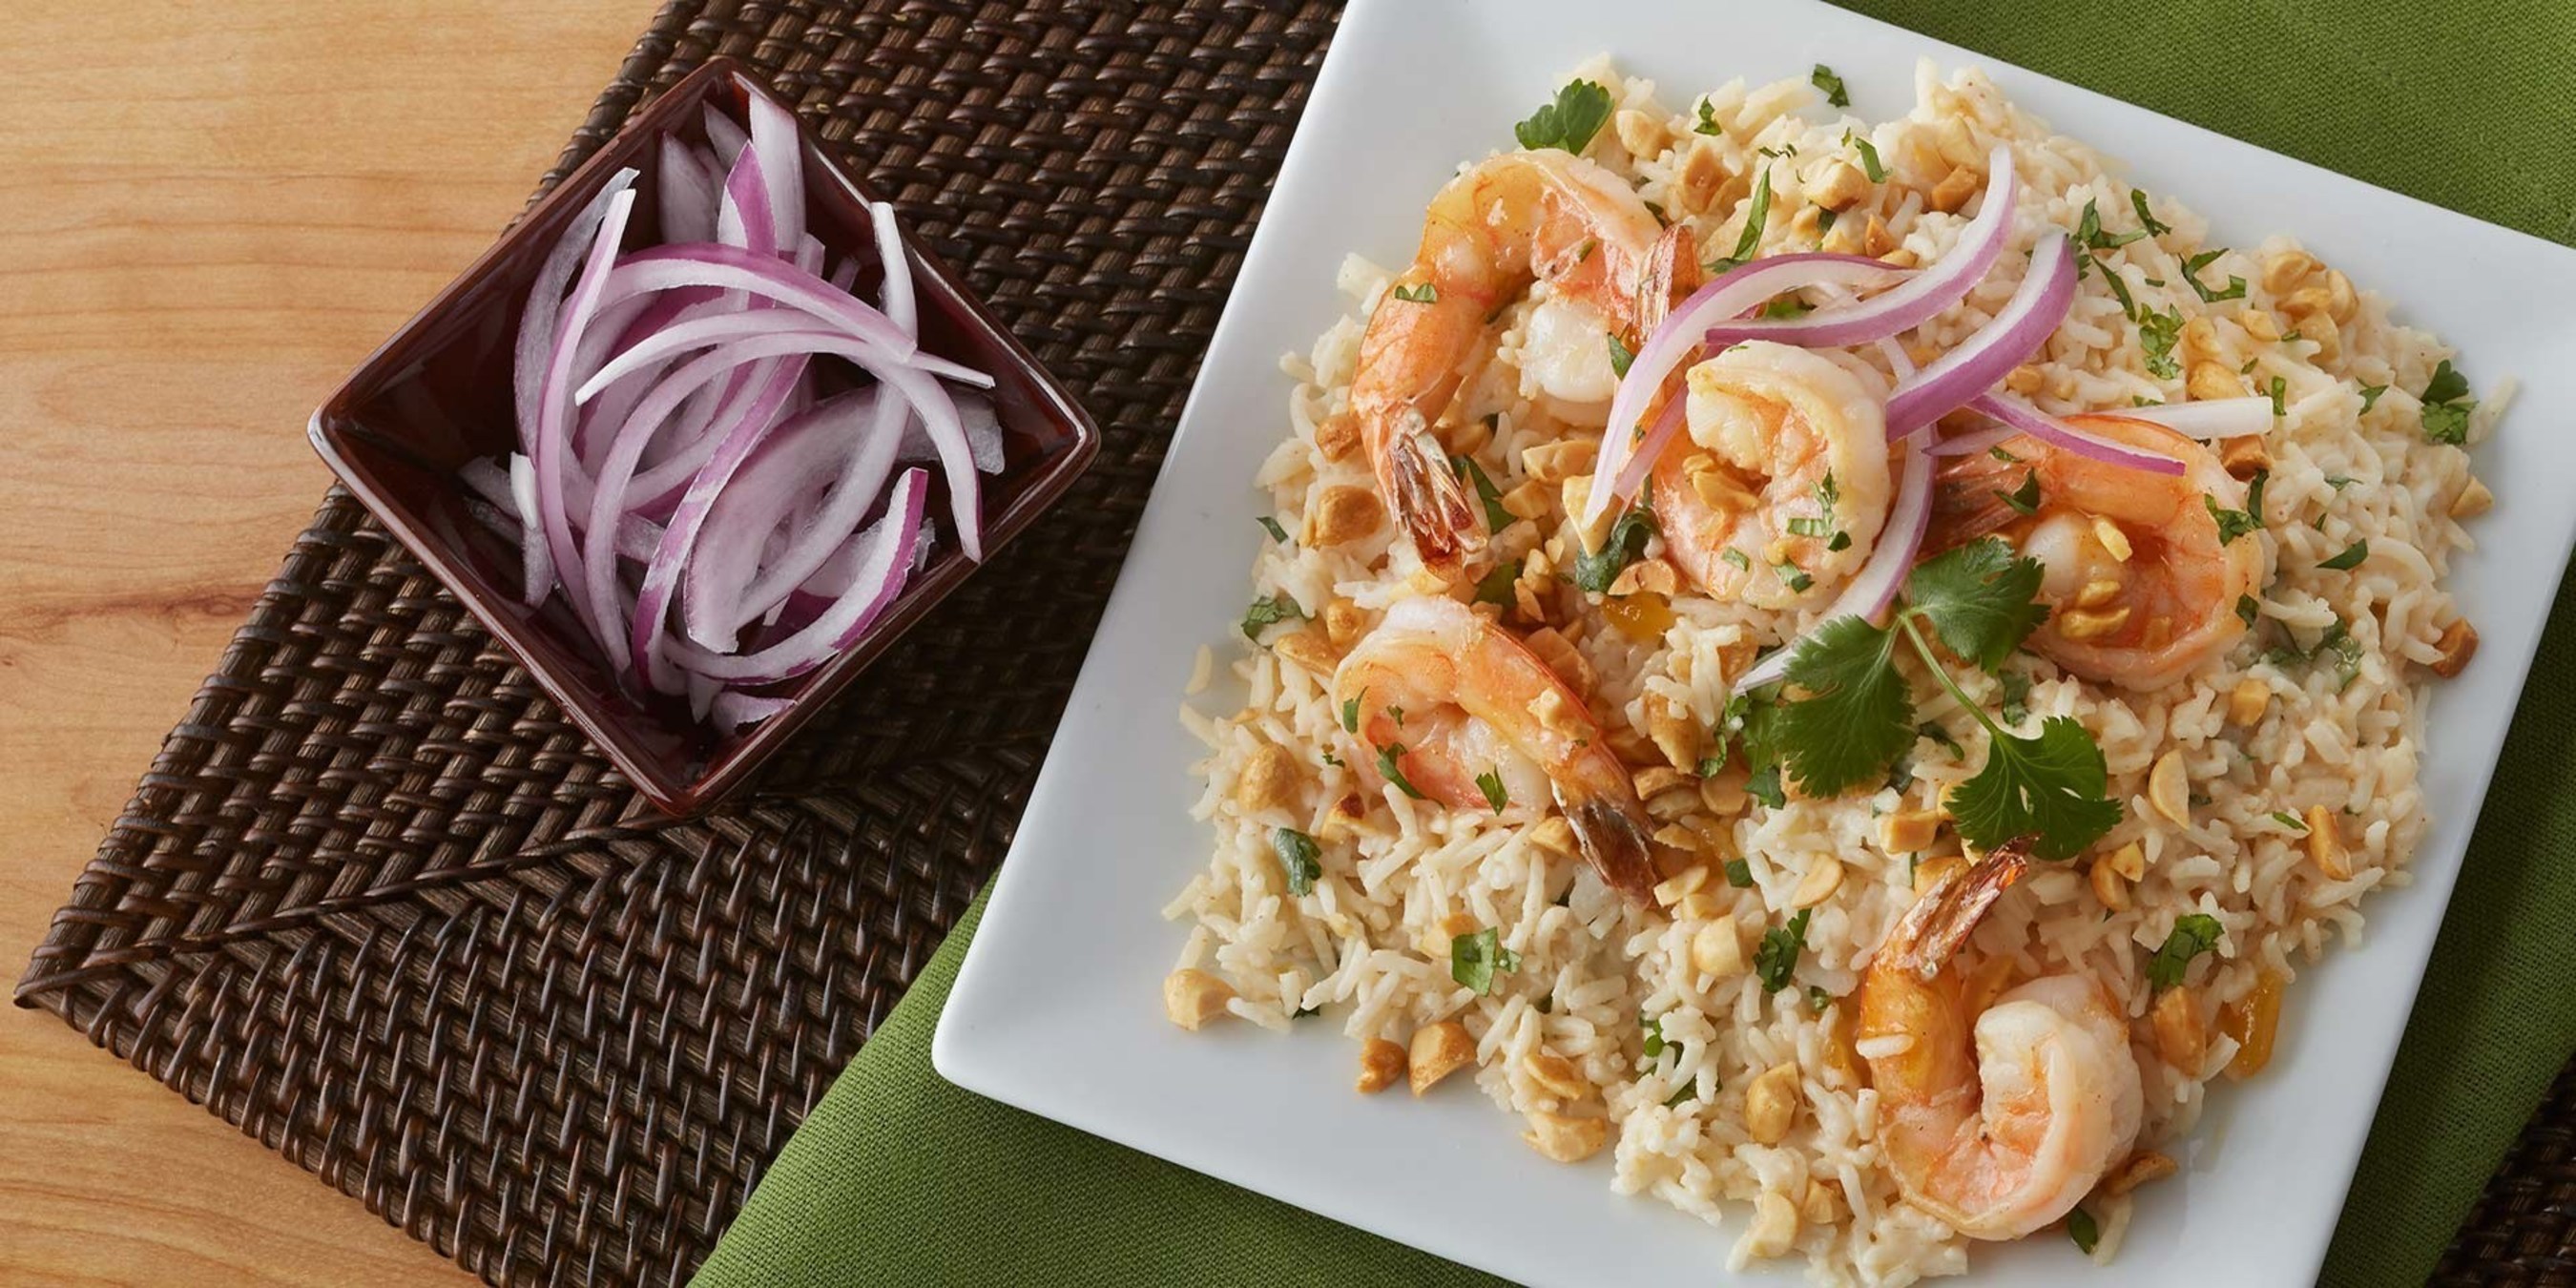 Celebrate National Rice Month with this Shrimp Chutney made with the new Minute Ready to Serve Basmati Rice. With its aromatic fragrance, nutty flavor and 60-second heating time, Minute Ready to Serve Basmati Rice is a great foundation to any Asian, Middle Eastern and traditional dish, making it another must-have pantry staple for those looking for flavor variety.